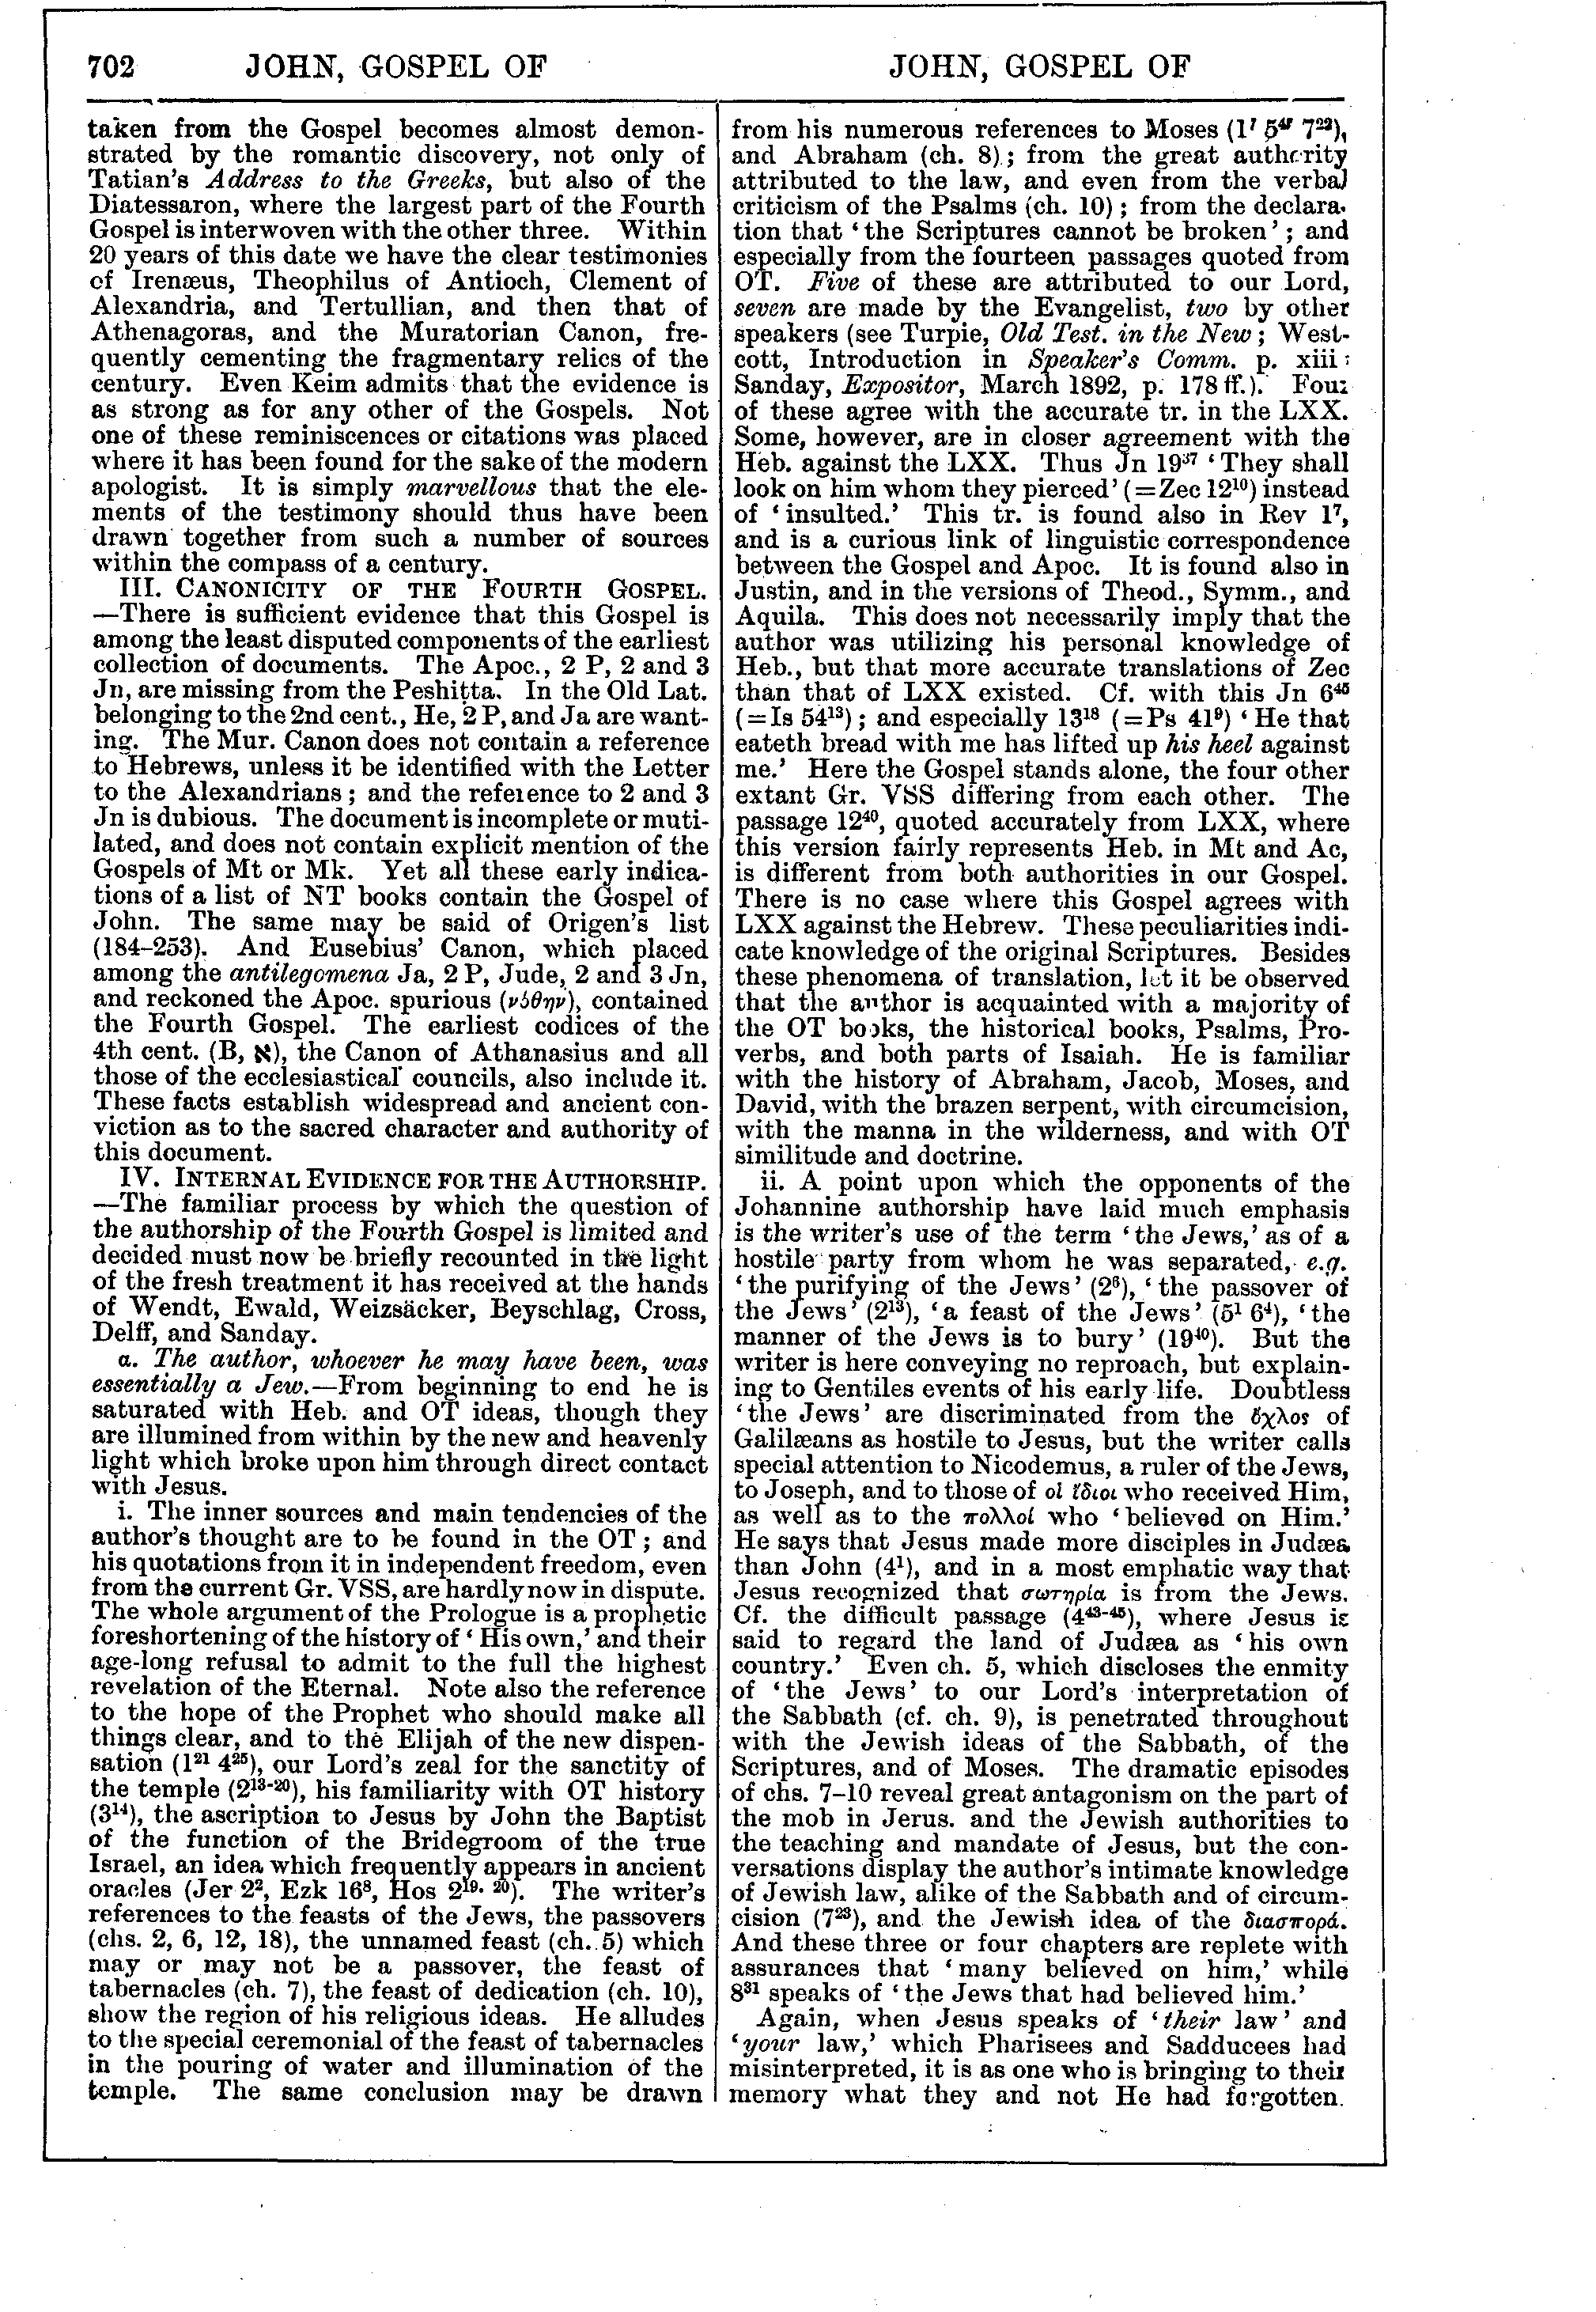 Image of page 702